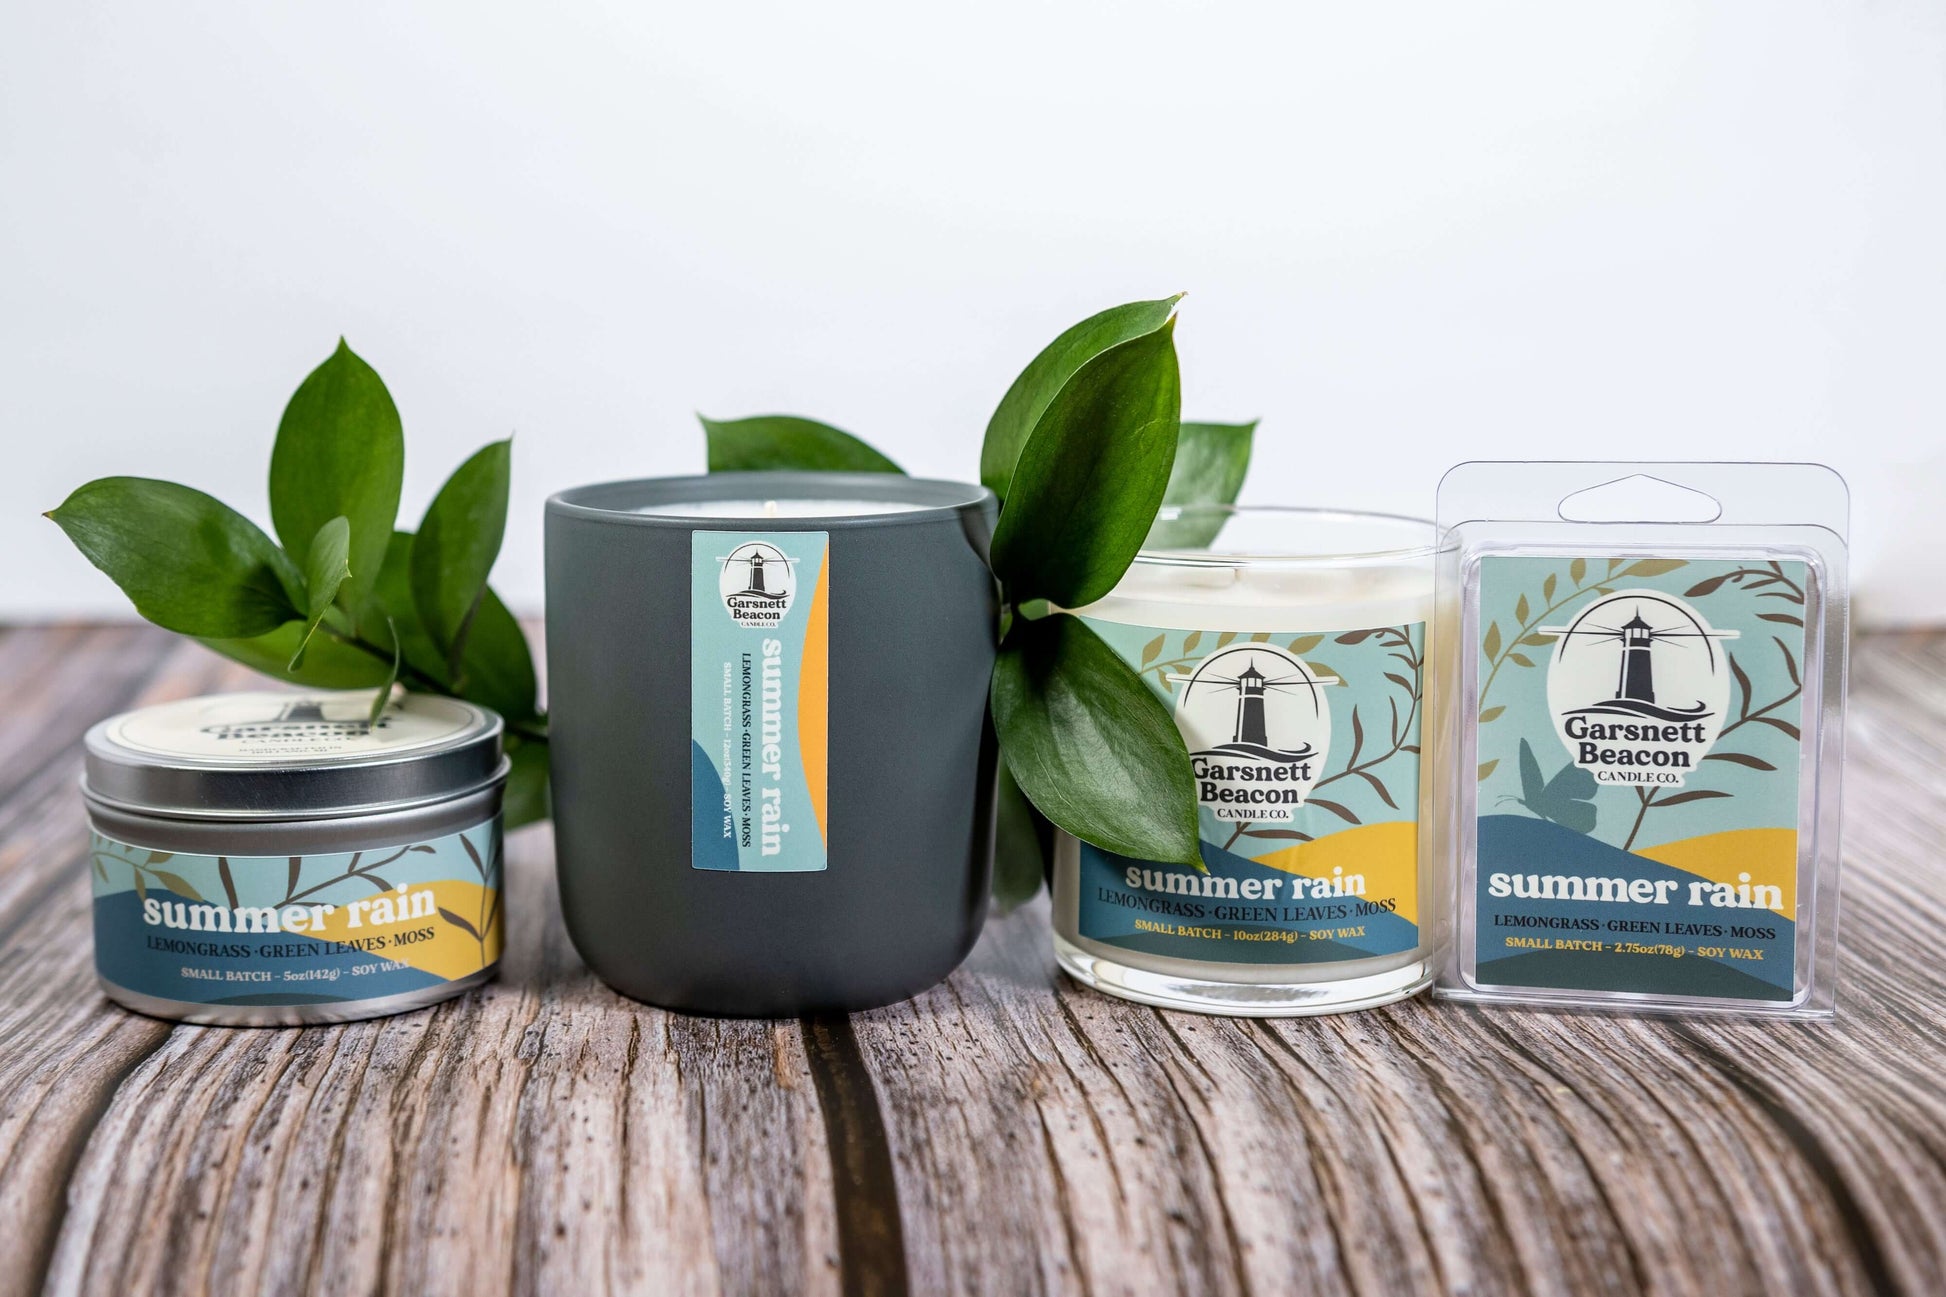 Lemongrass Green Leaves Lily of the Valley Ozone Moss scented candles called Summer Rain in glass ceramic tin and wax melts